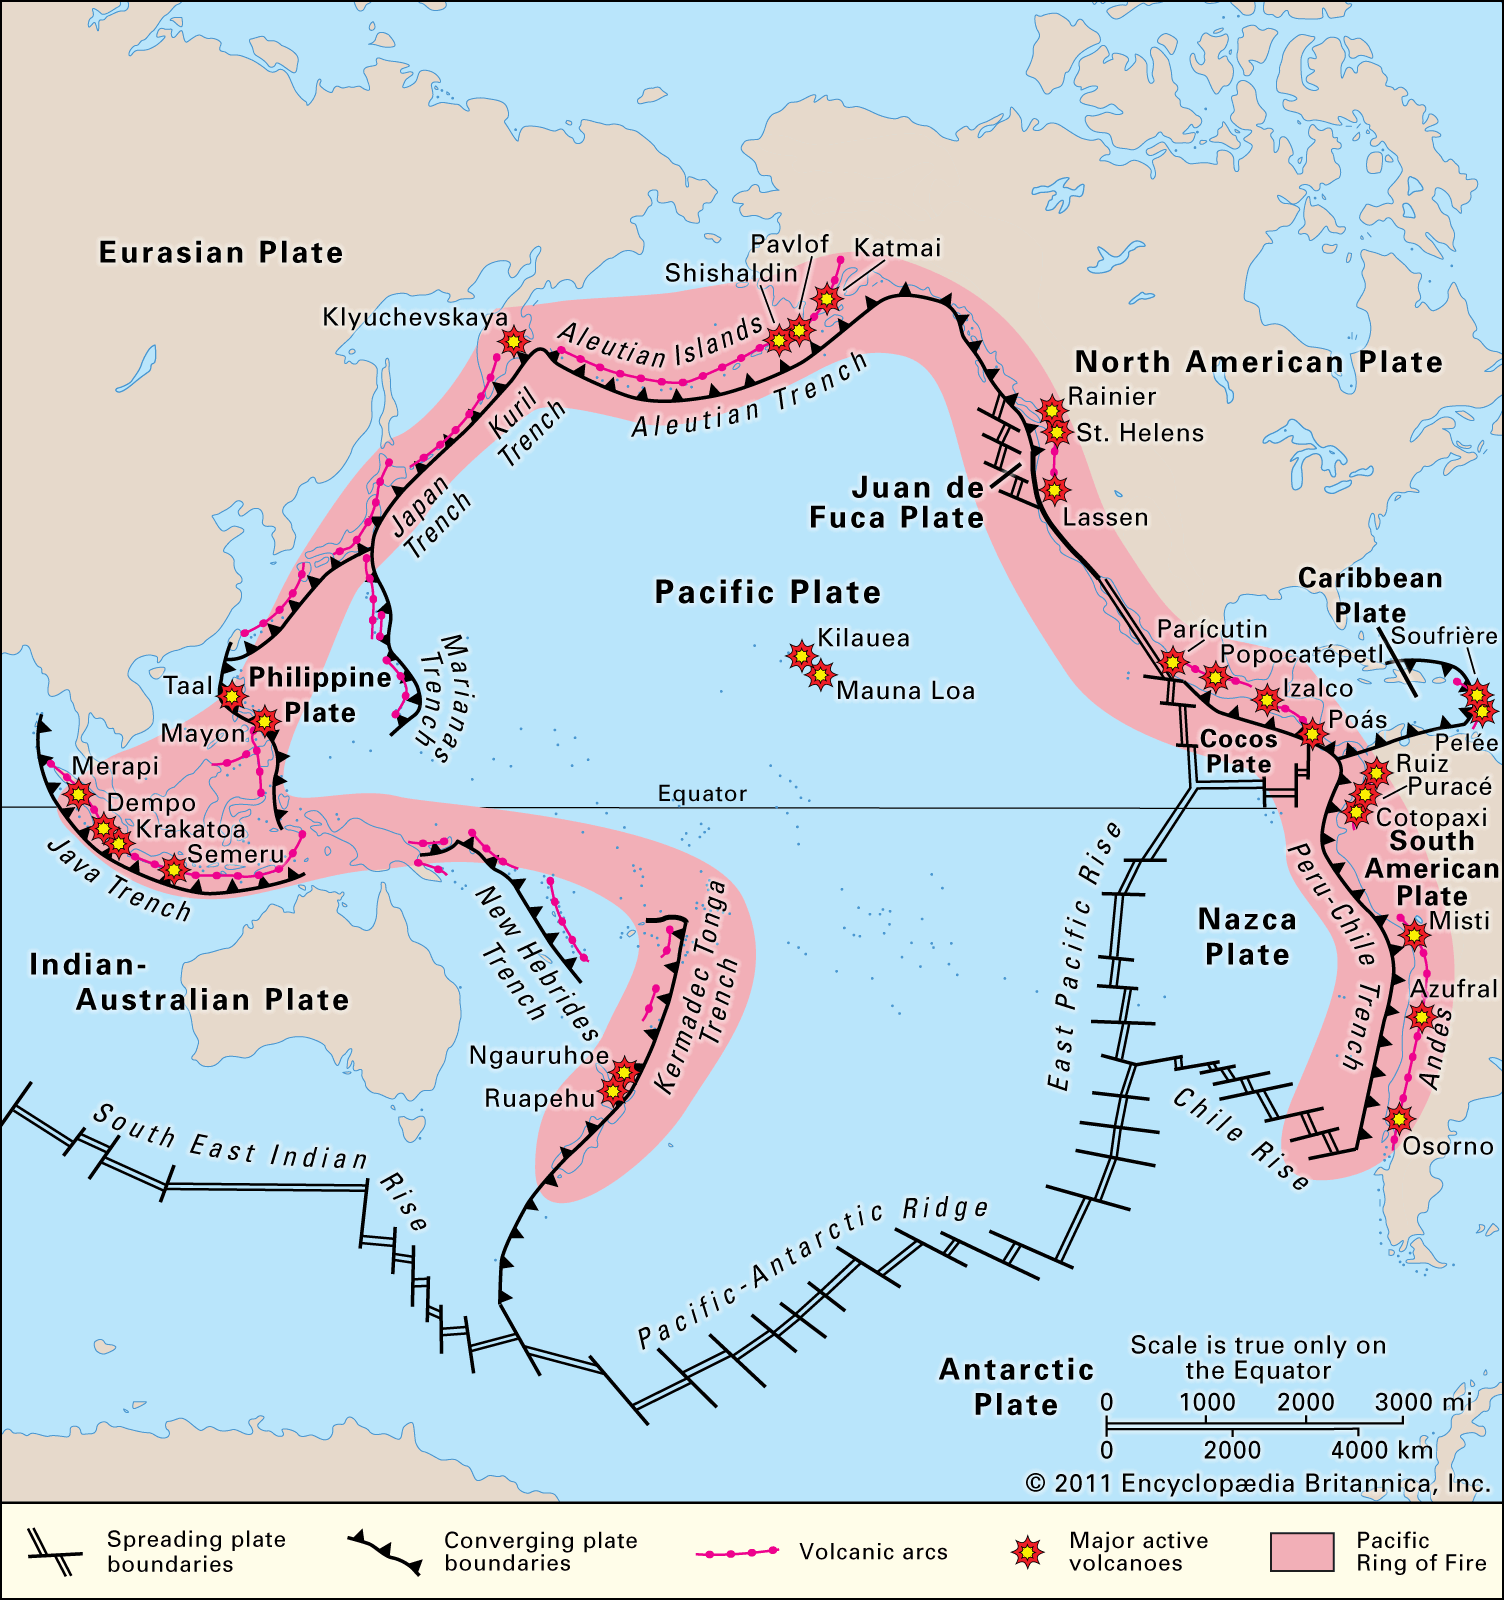 Pacific Ring Of Fire | Barron's